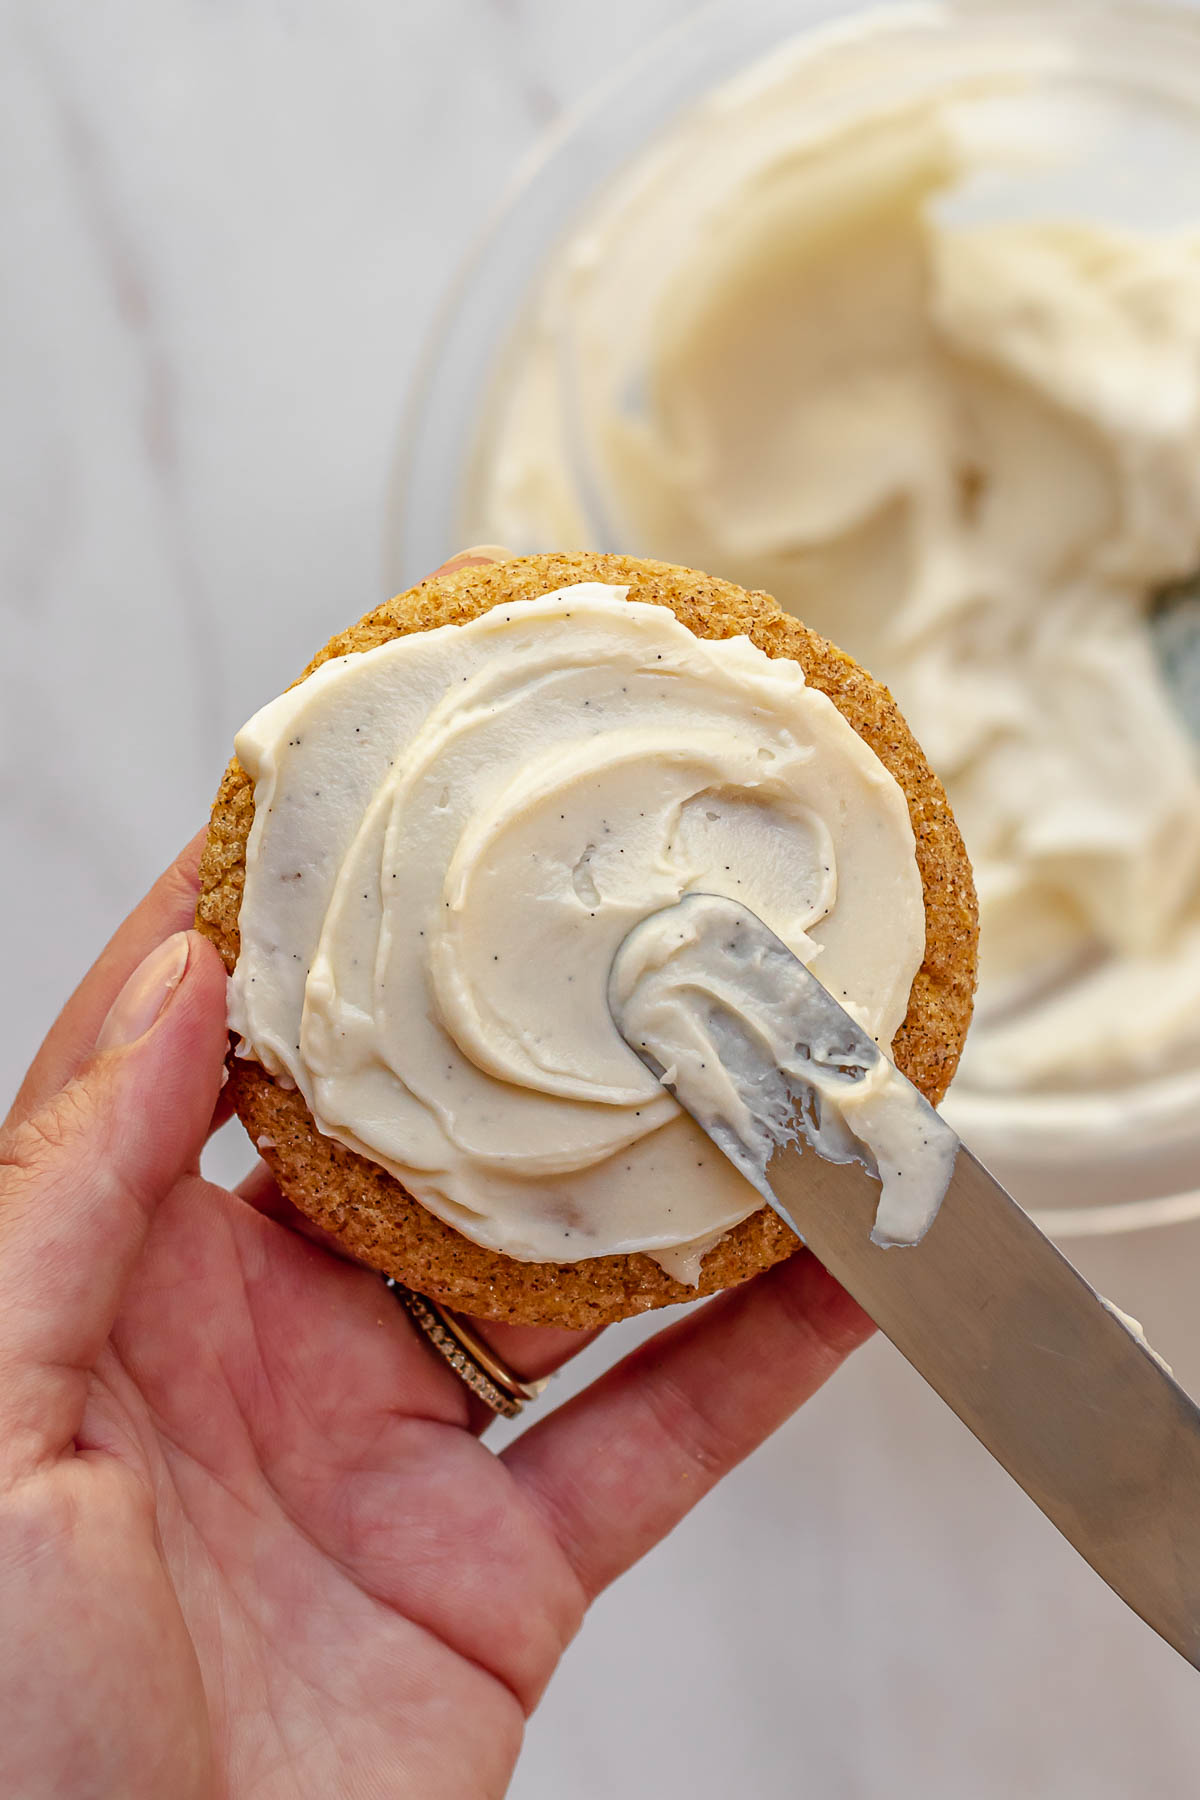 A rubber spatula swirls the cheesecake topping onto the cookie.